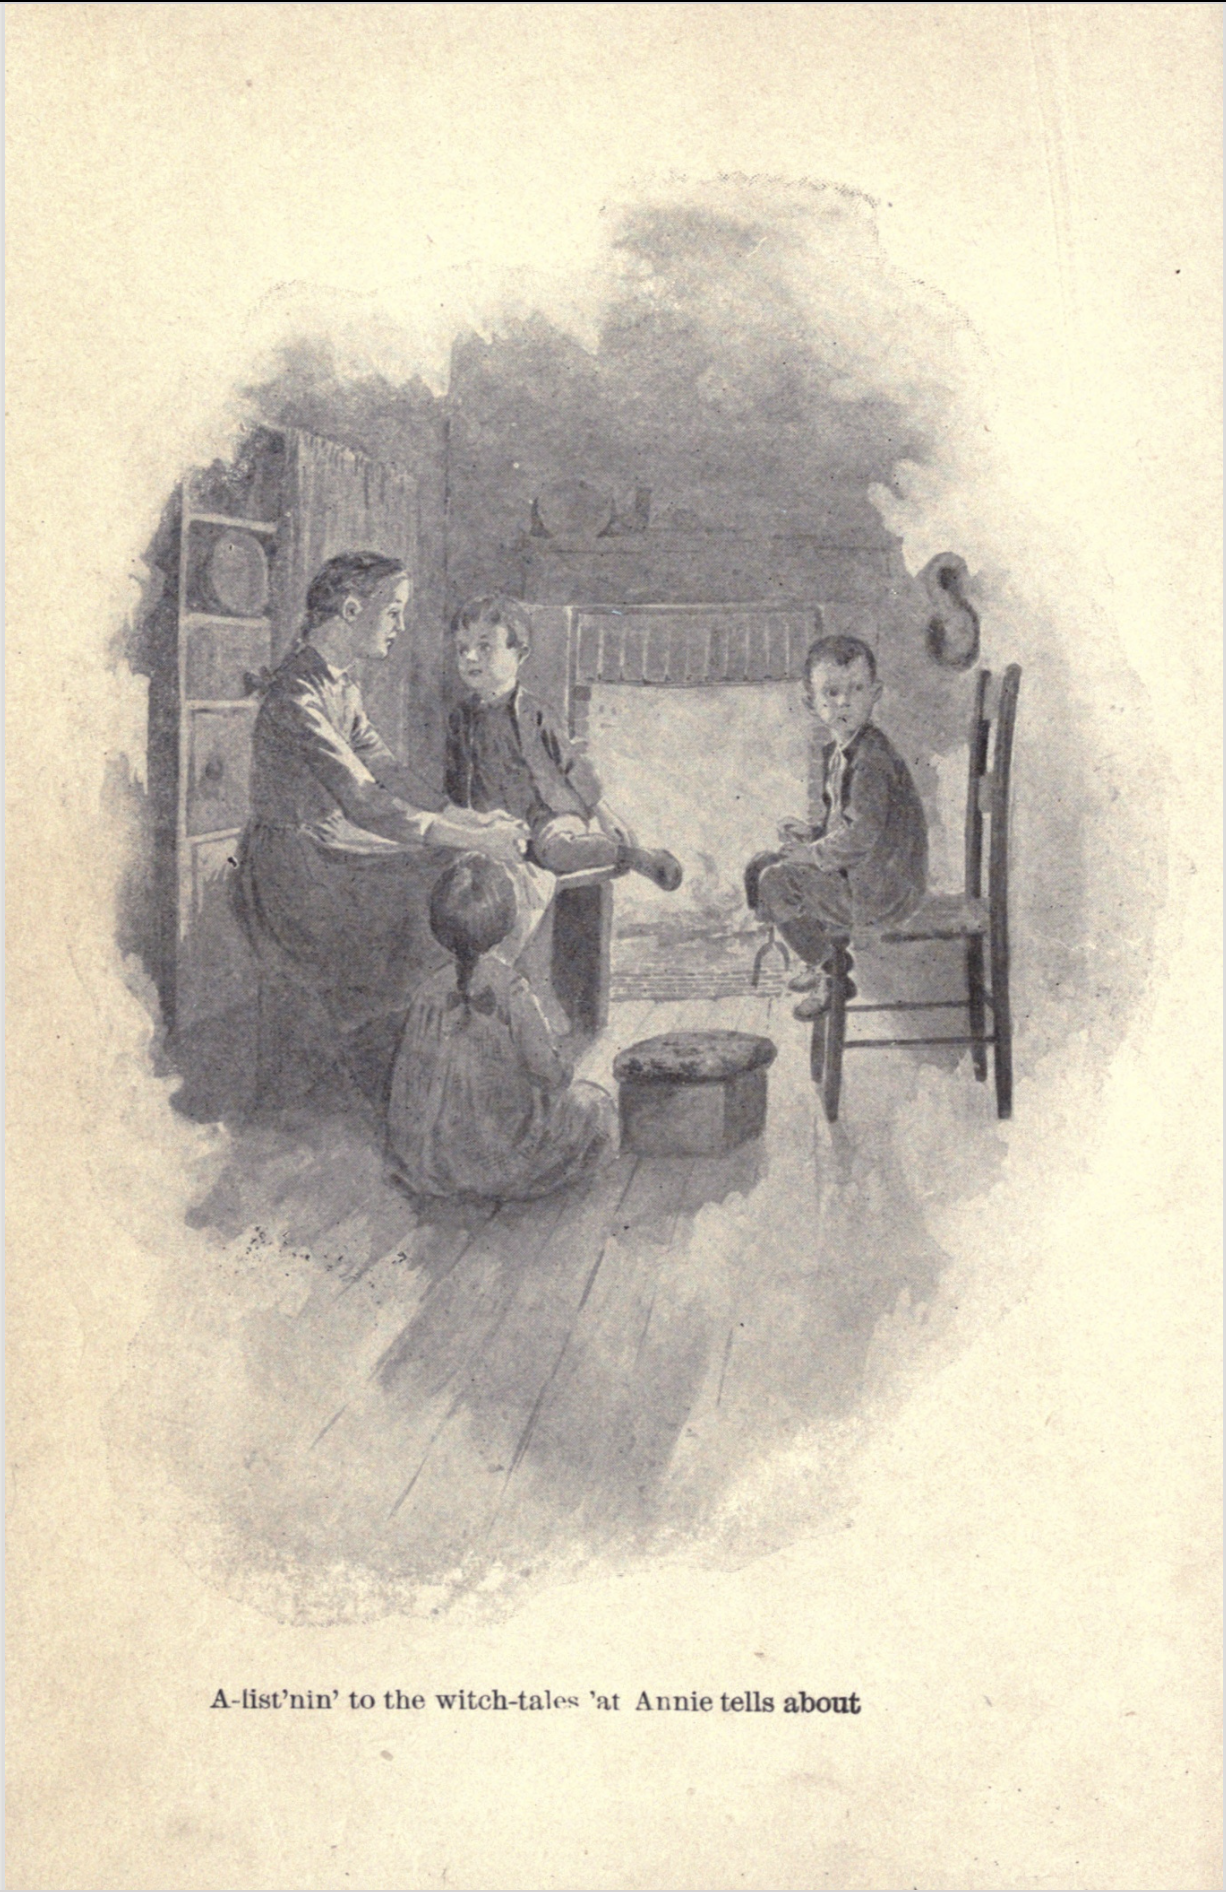 An illustration that features a woman who looks to be telling a story to three children. 